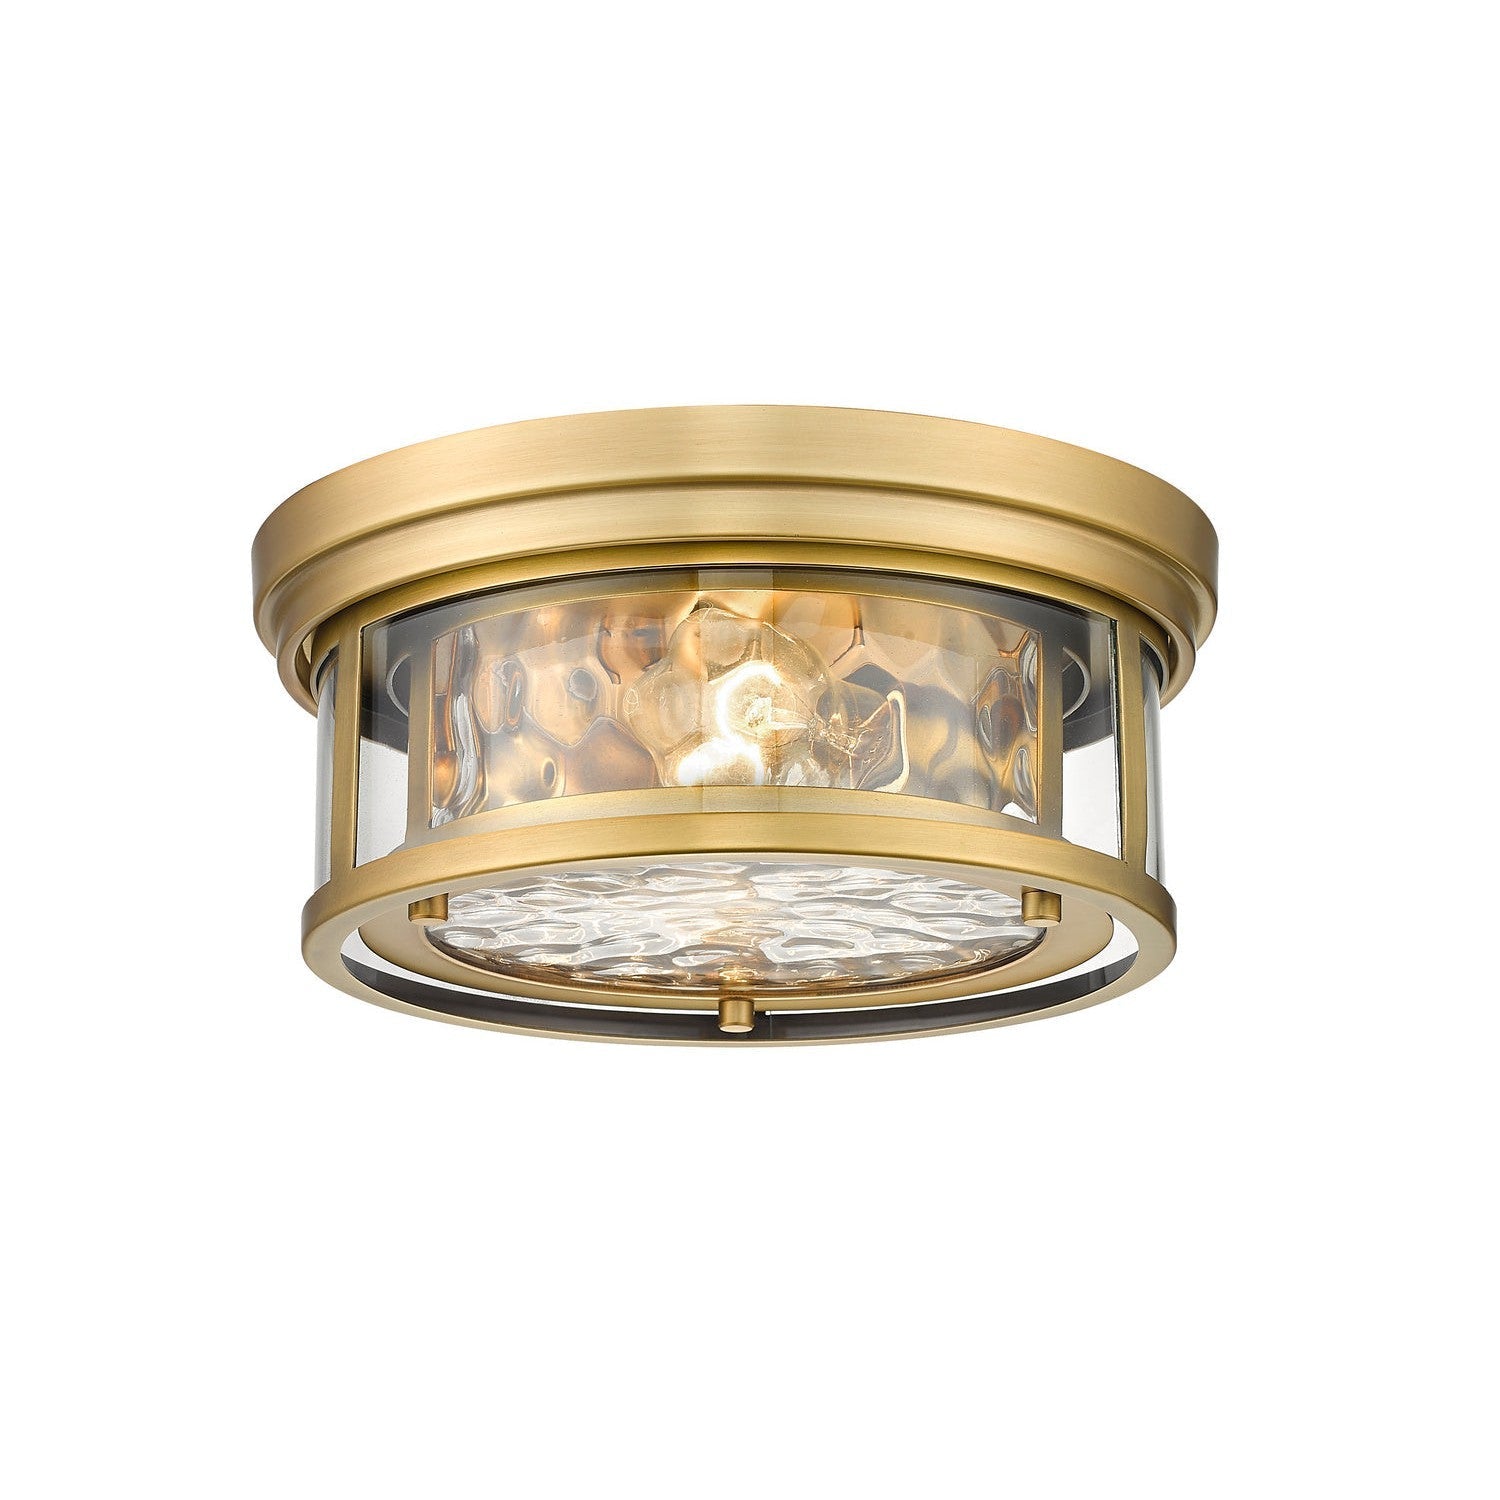 Z-Lite Clarion 493F2-RB Ceiling Light - Rubbed Brass